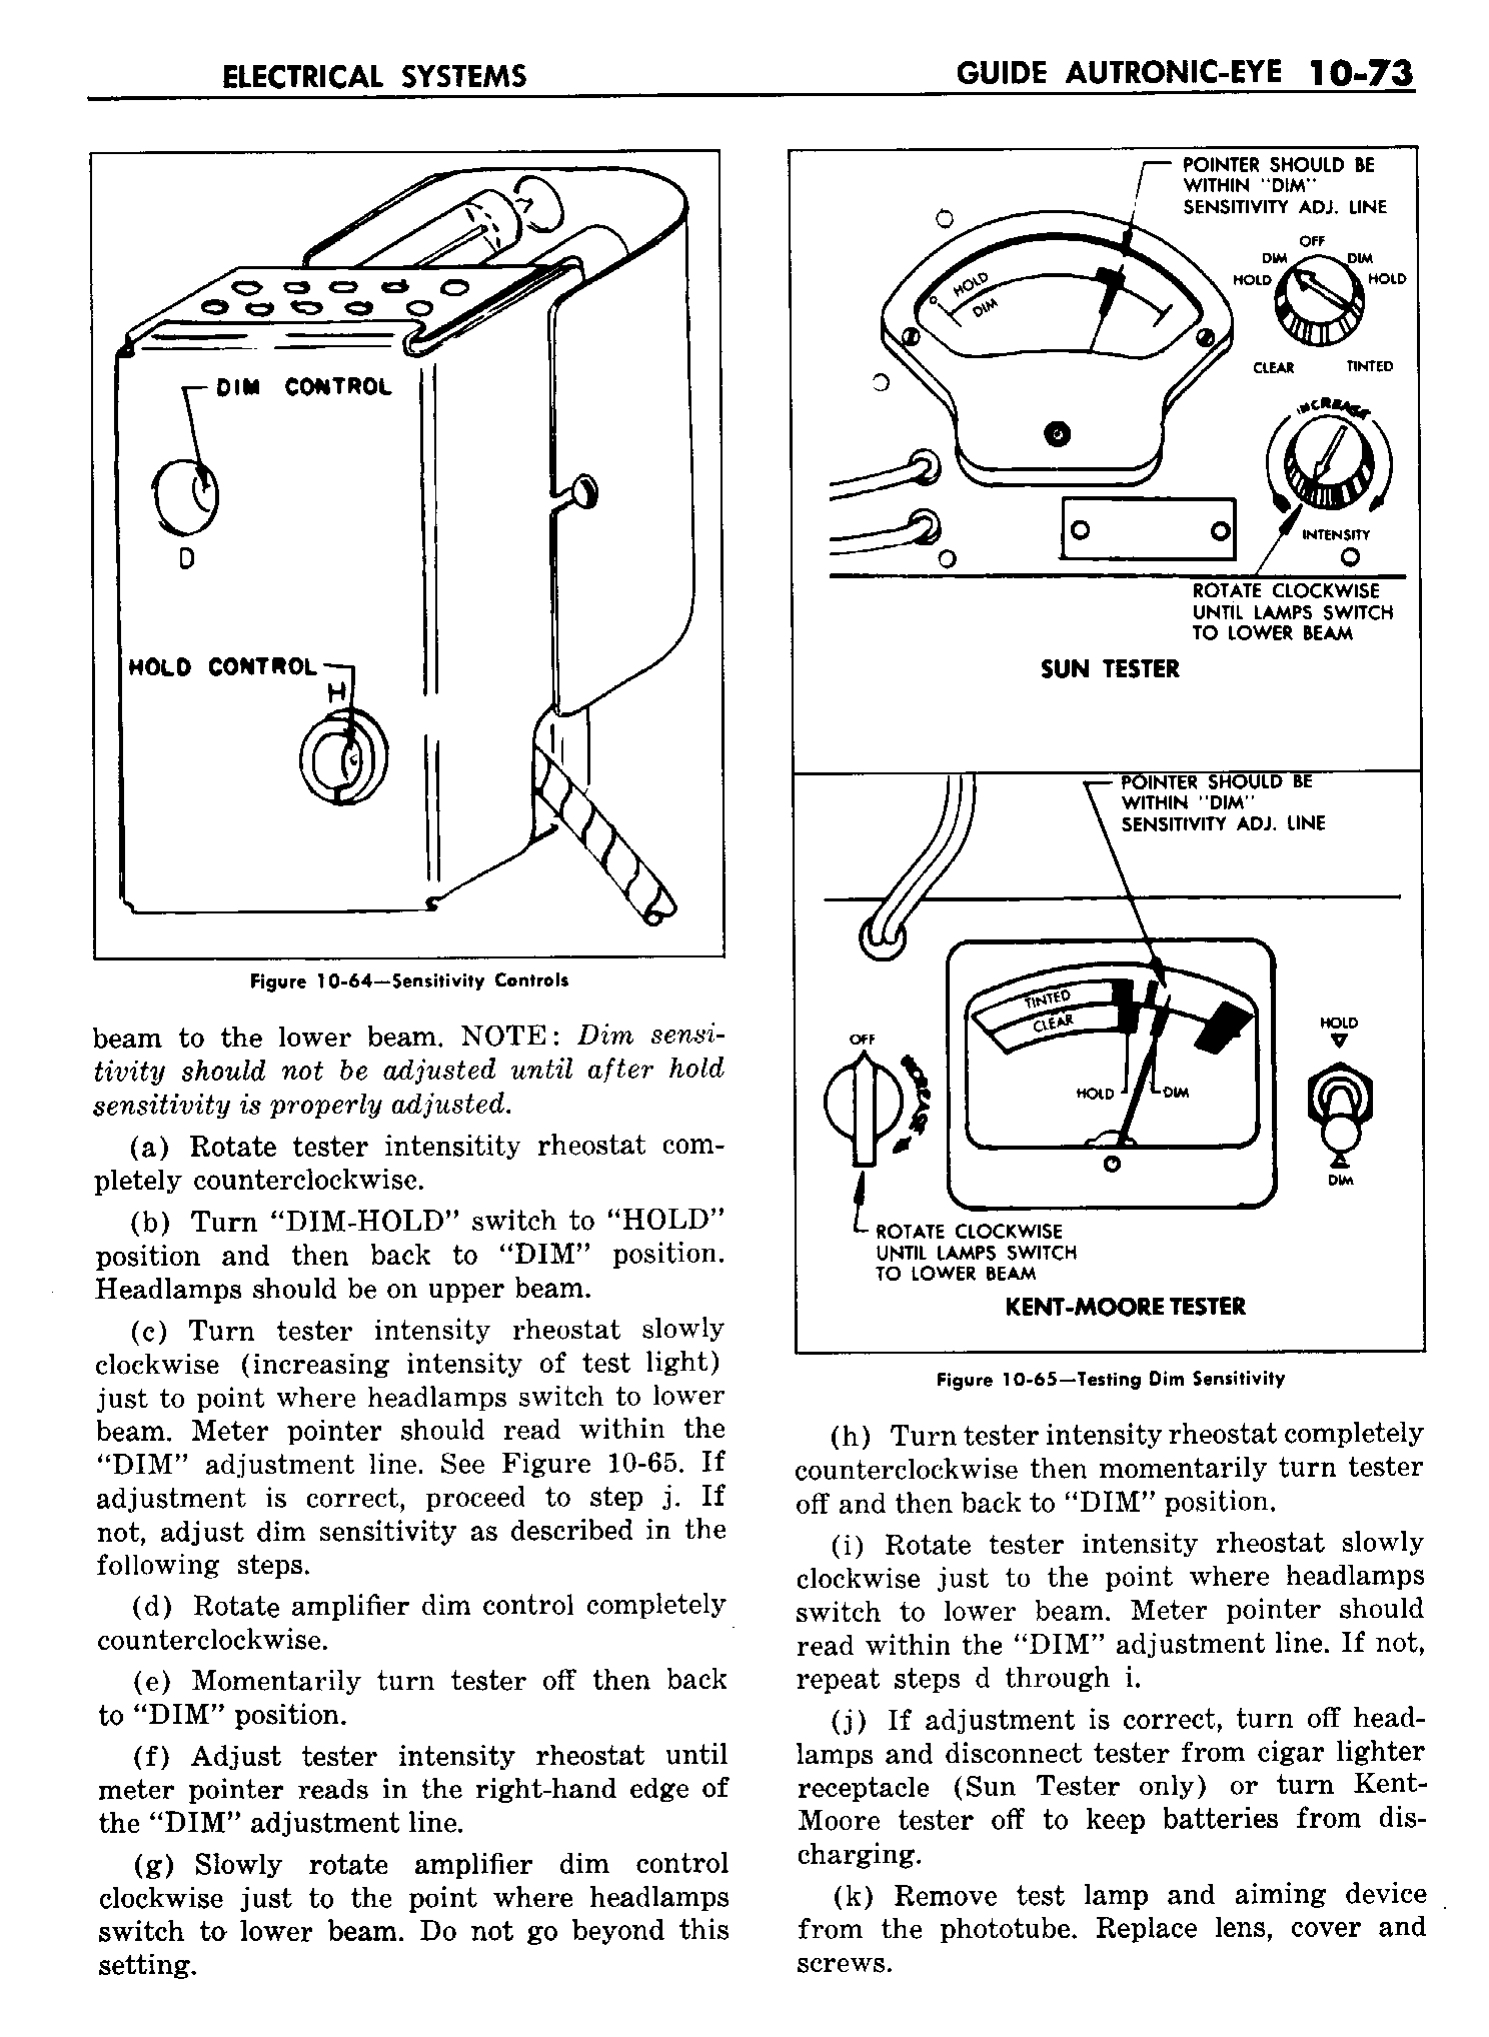 n_11 1958 Buick Shop Manual - Electrical Systems_73.jpg